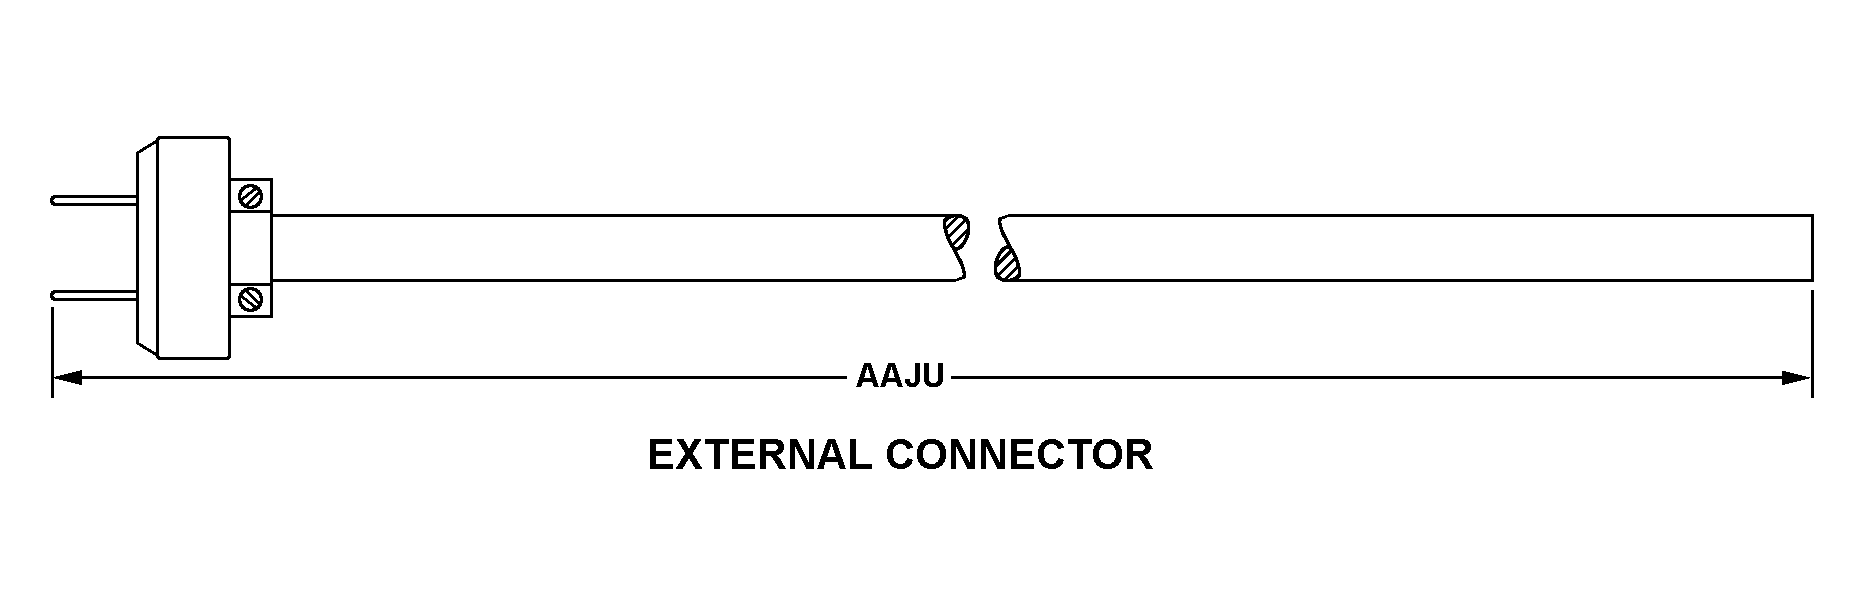 EXTERNAL CONNECTOR style nsn 5995-01-090-9482